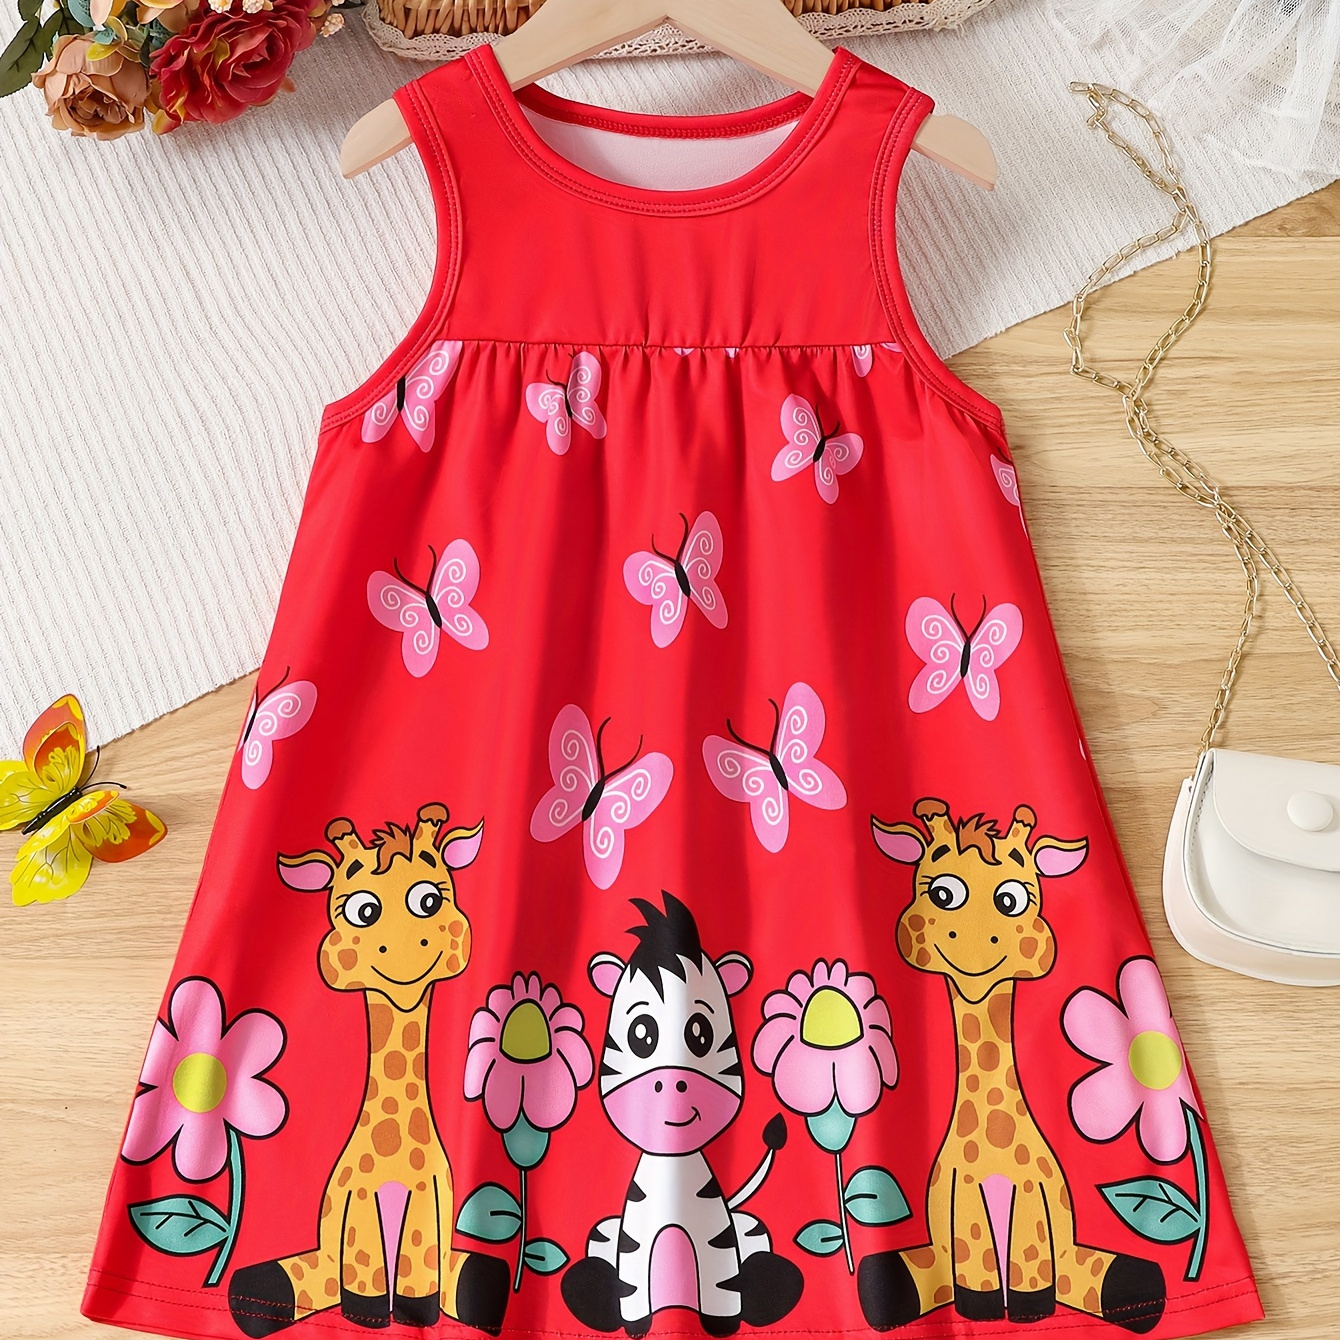 

Cartoon Animal Print Sundress For Girls, Comfy Breathable Holiday Tent Dresses